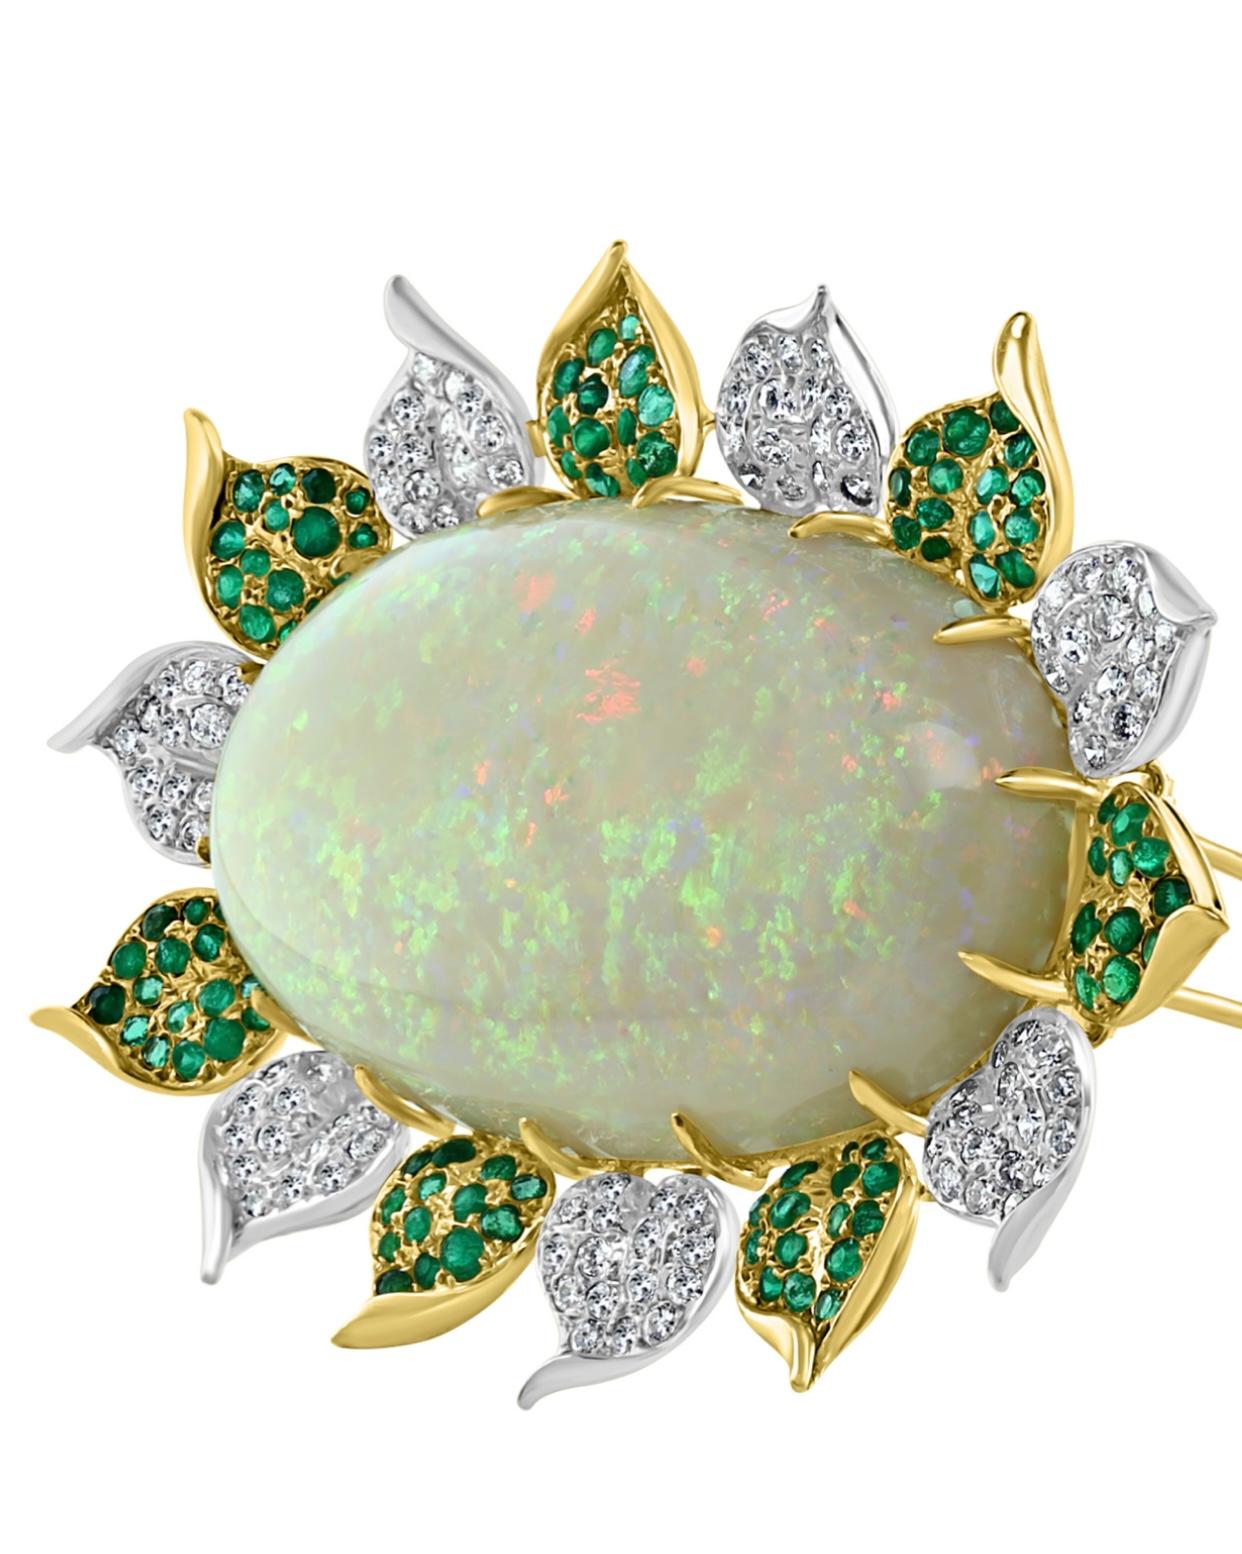 This stunning piece of jewelry is a Pin/Necklace made of 18 Karat yellow gold. It features a magnificent 107 Carat Oval Australian Opal as its centerpiece. Surrounding the opal are approximately 3.6 Carats of brilliant cut diamonds and approximately